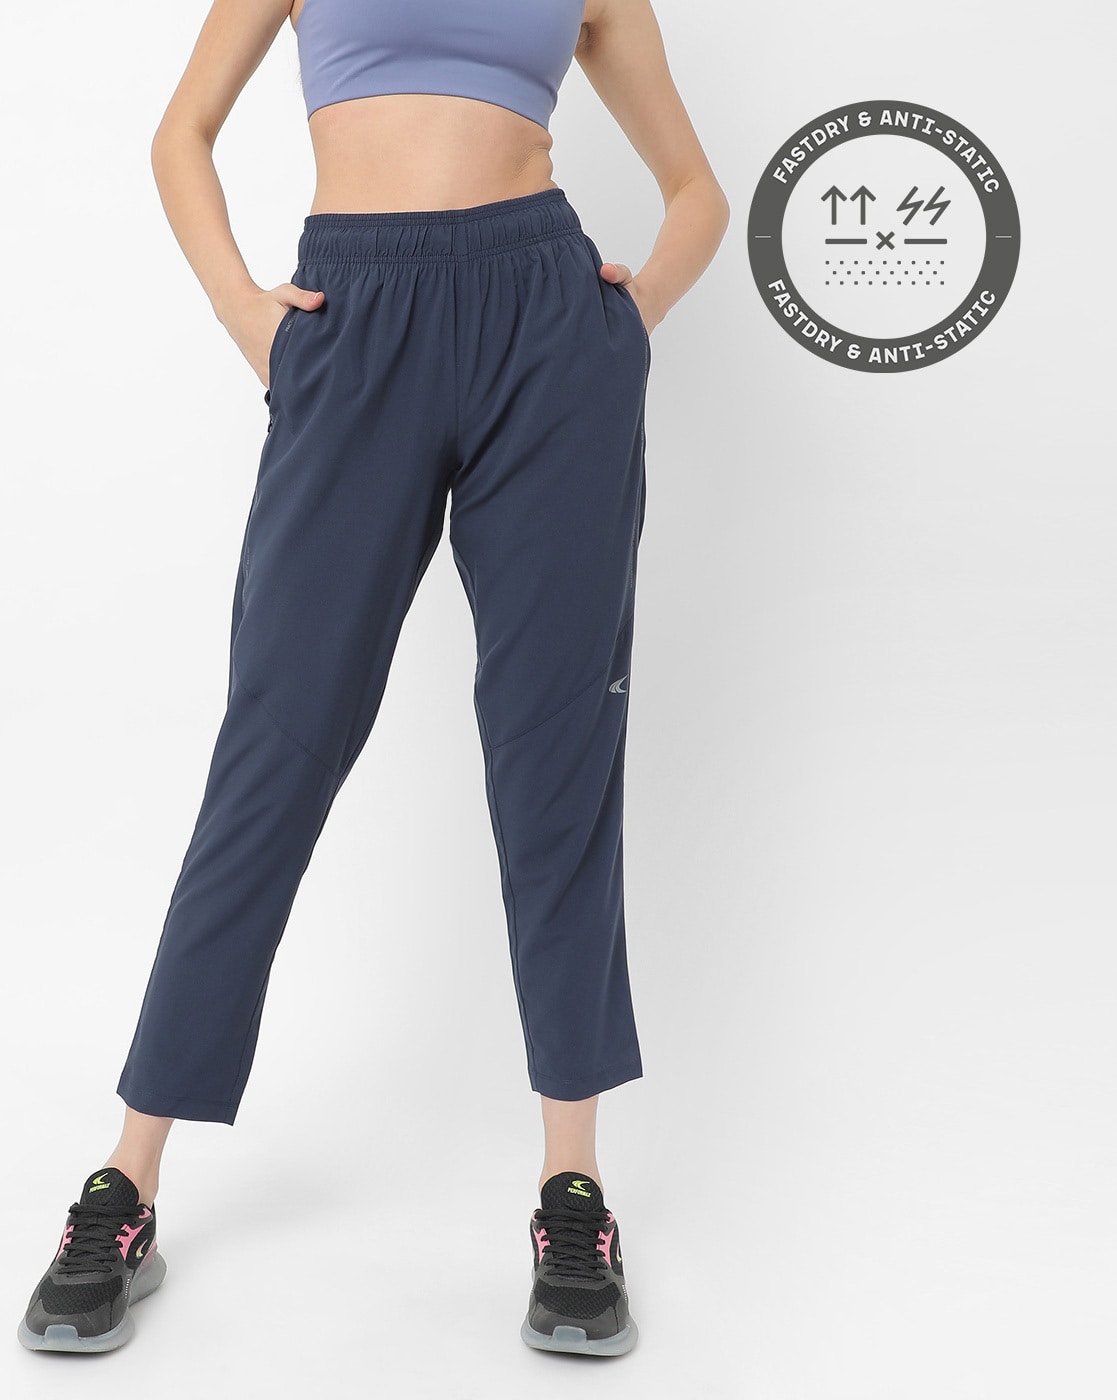 Buy Grey Track Pants for Men by FTX Online | Ajio.com